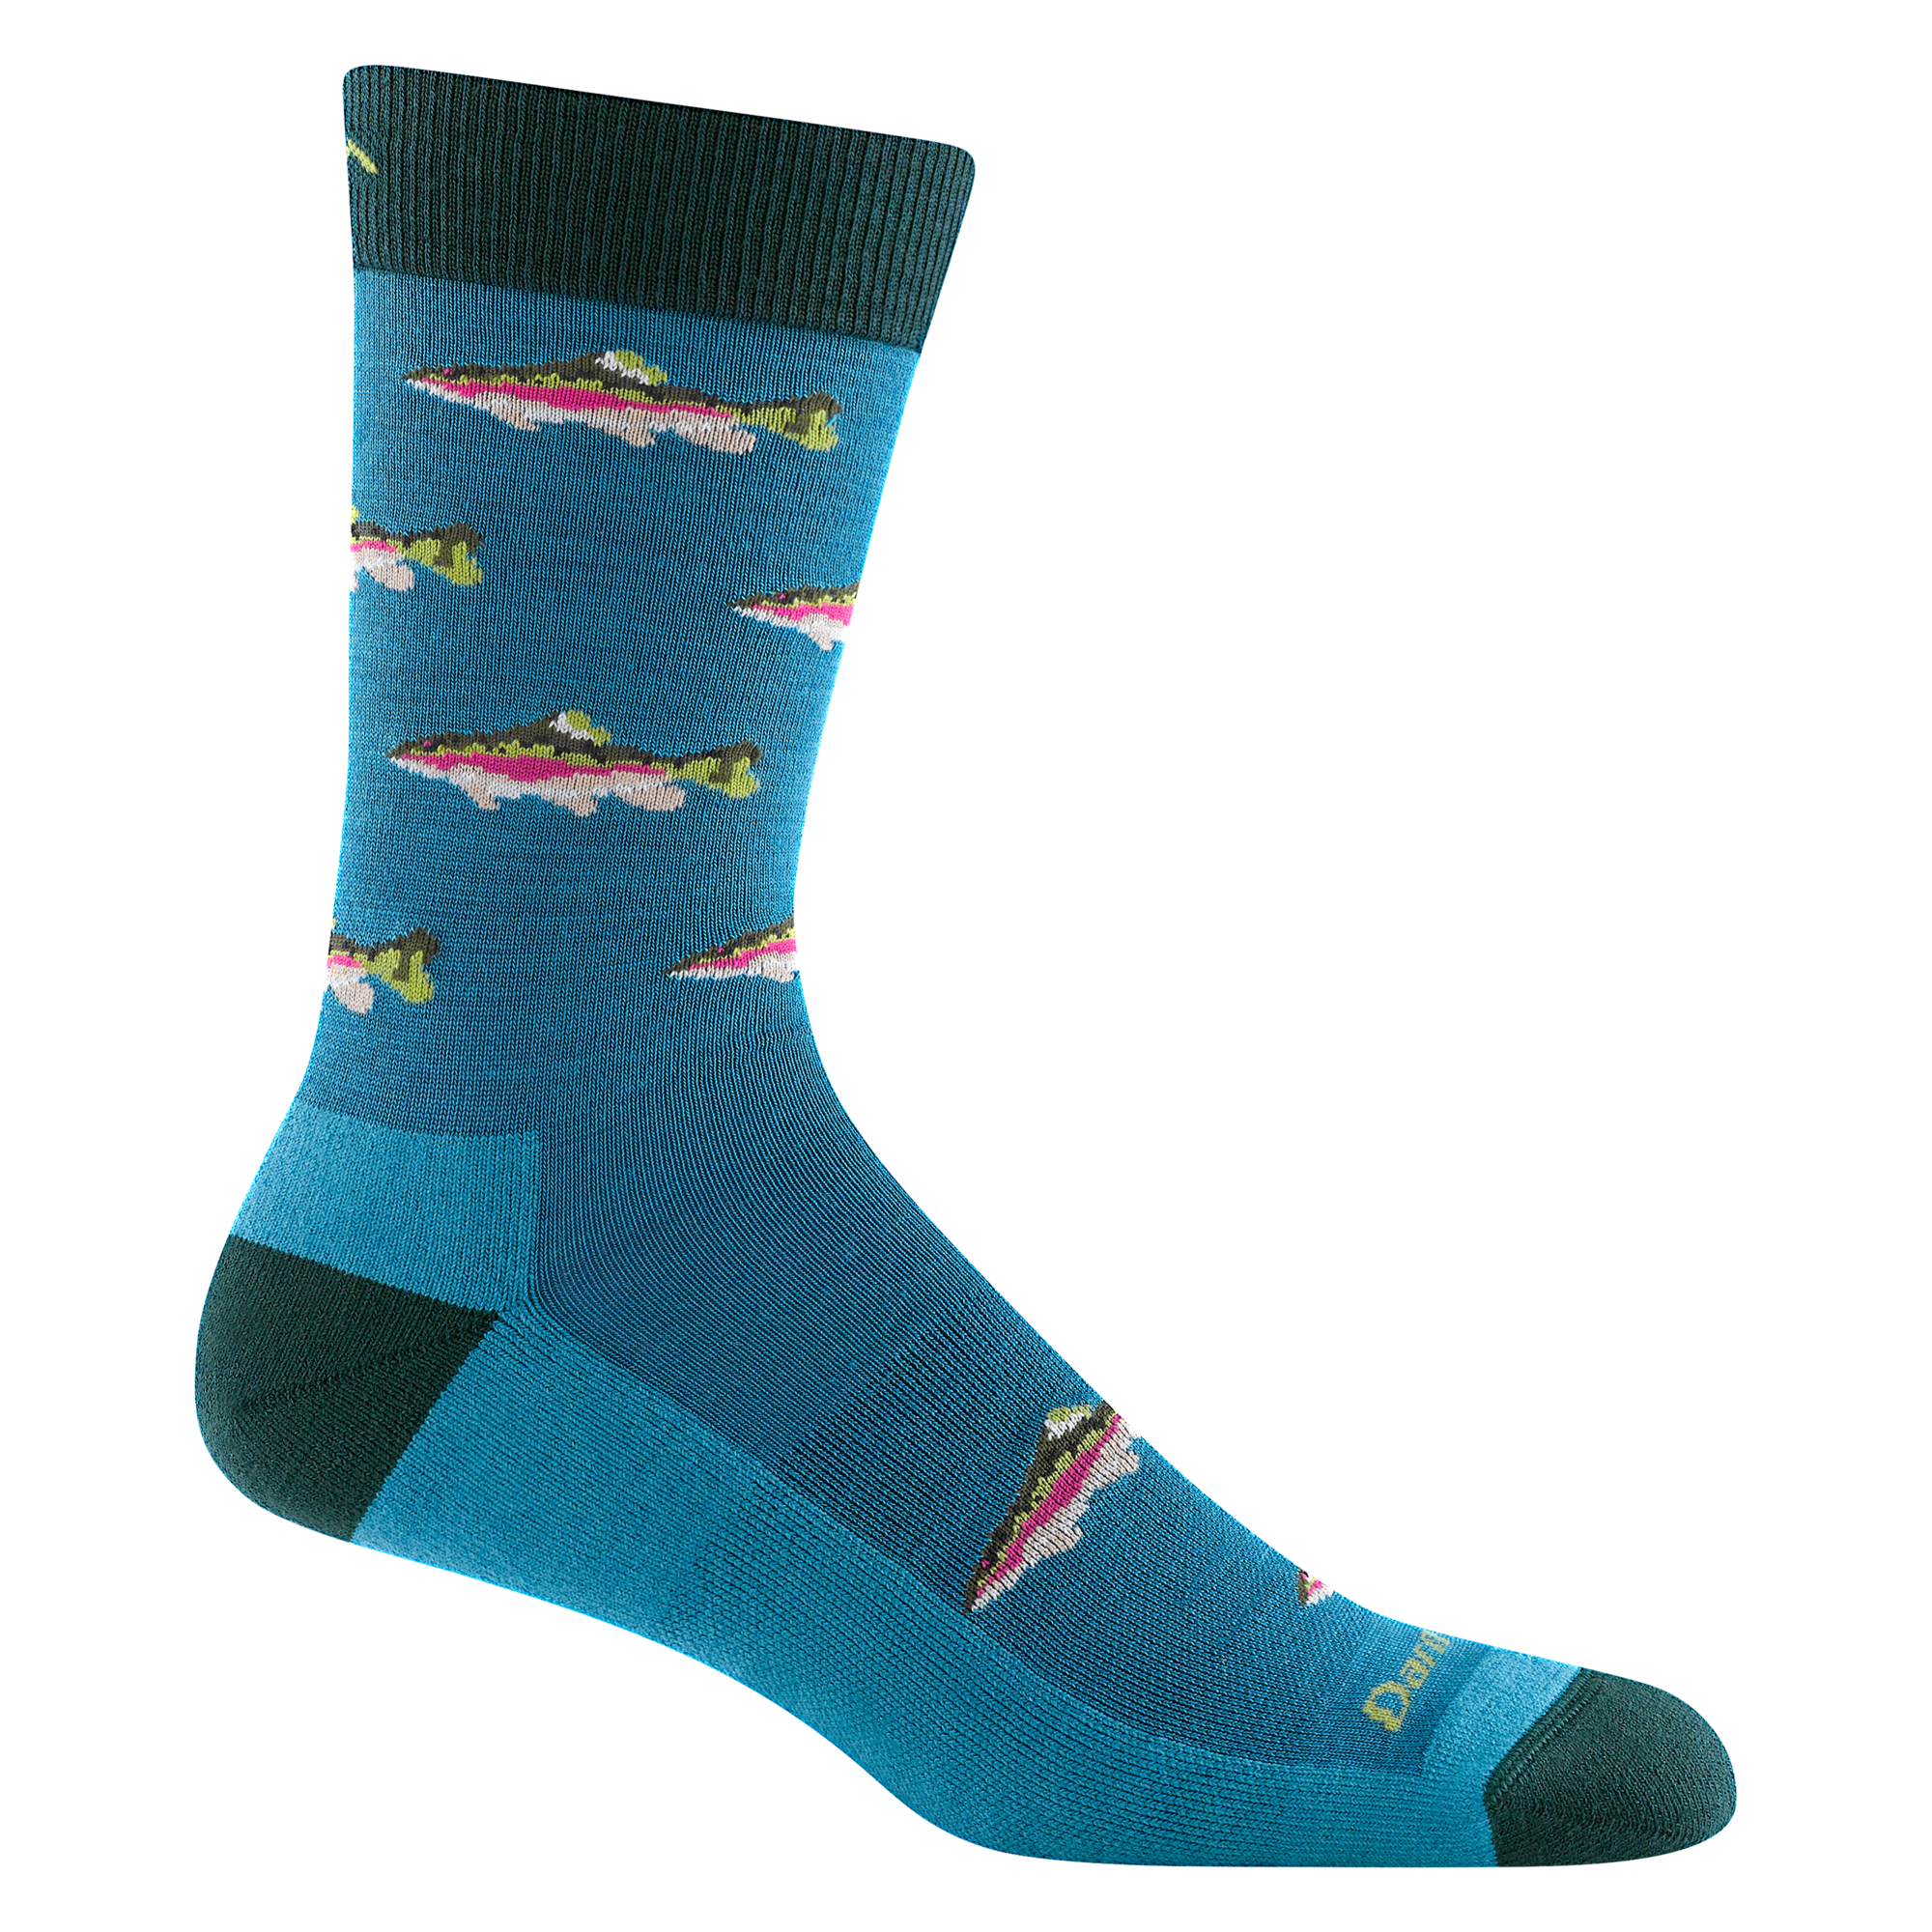 6085 Spey Fly crew in cascade featuring a dark teal heel/toe/cuff cascade blue body and fish designs